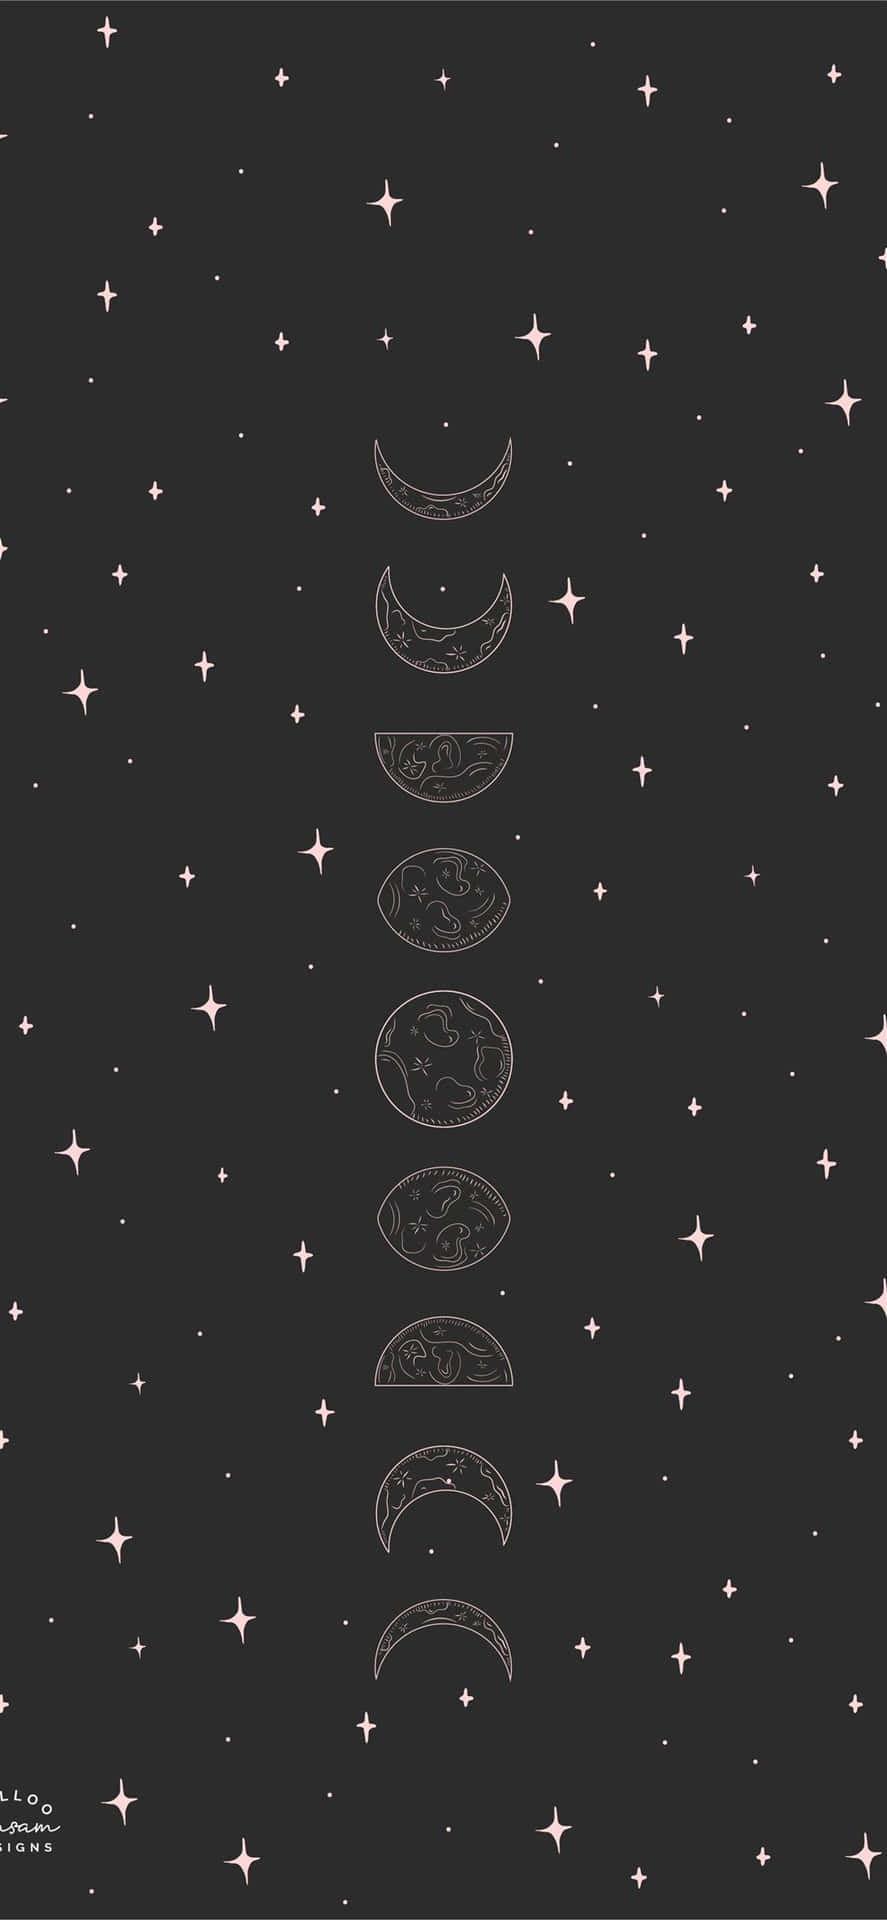 A Black Background With Stars And Moon Phases Wallpaper